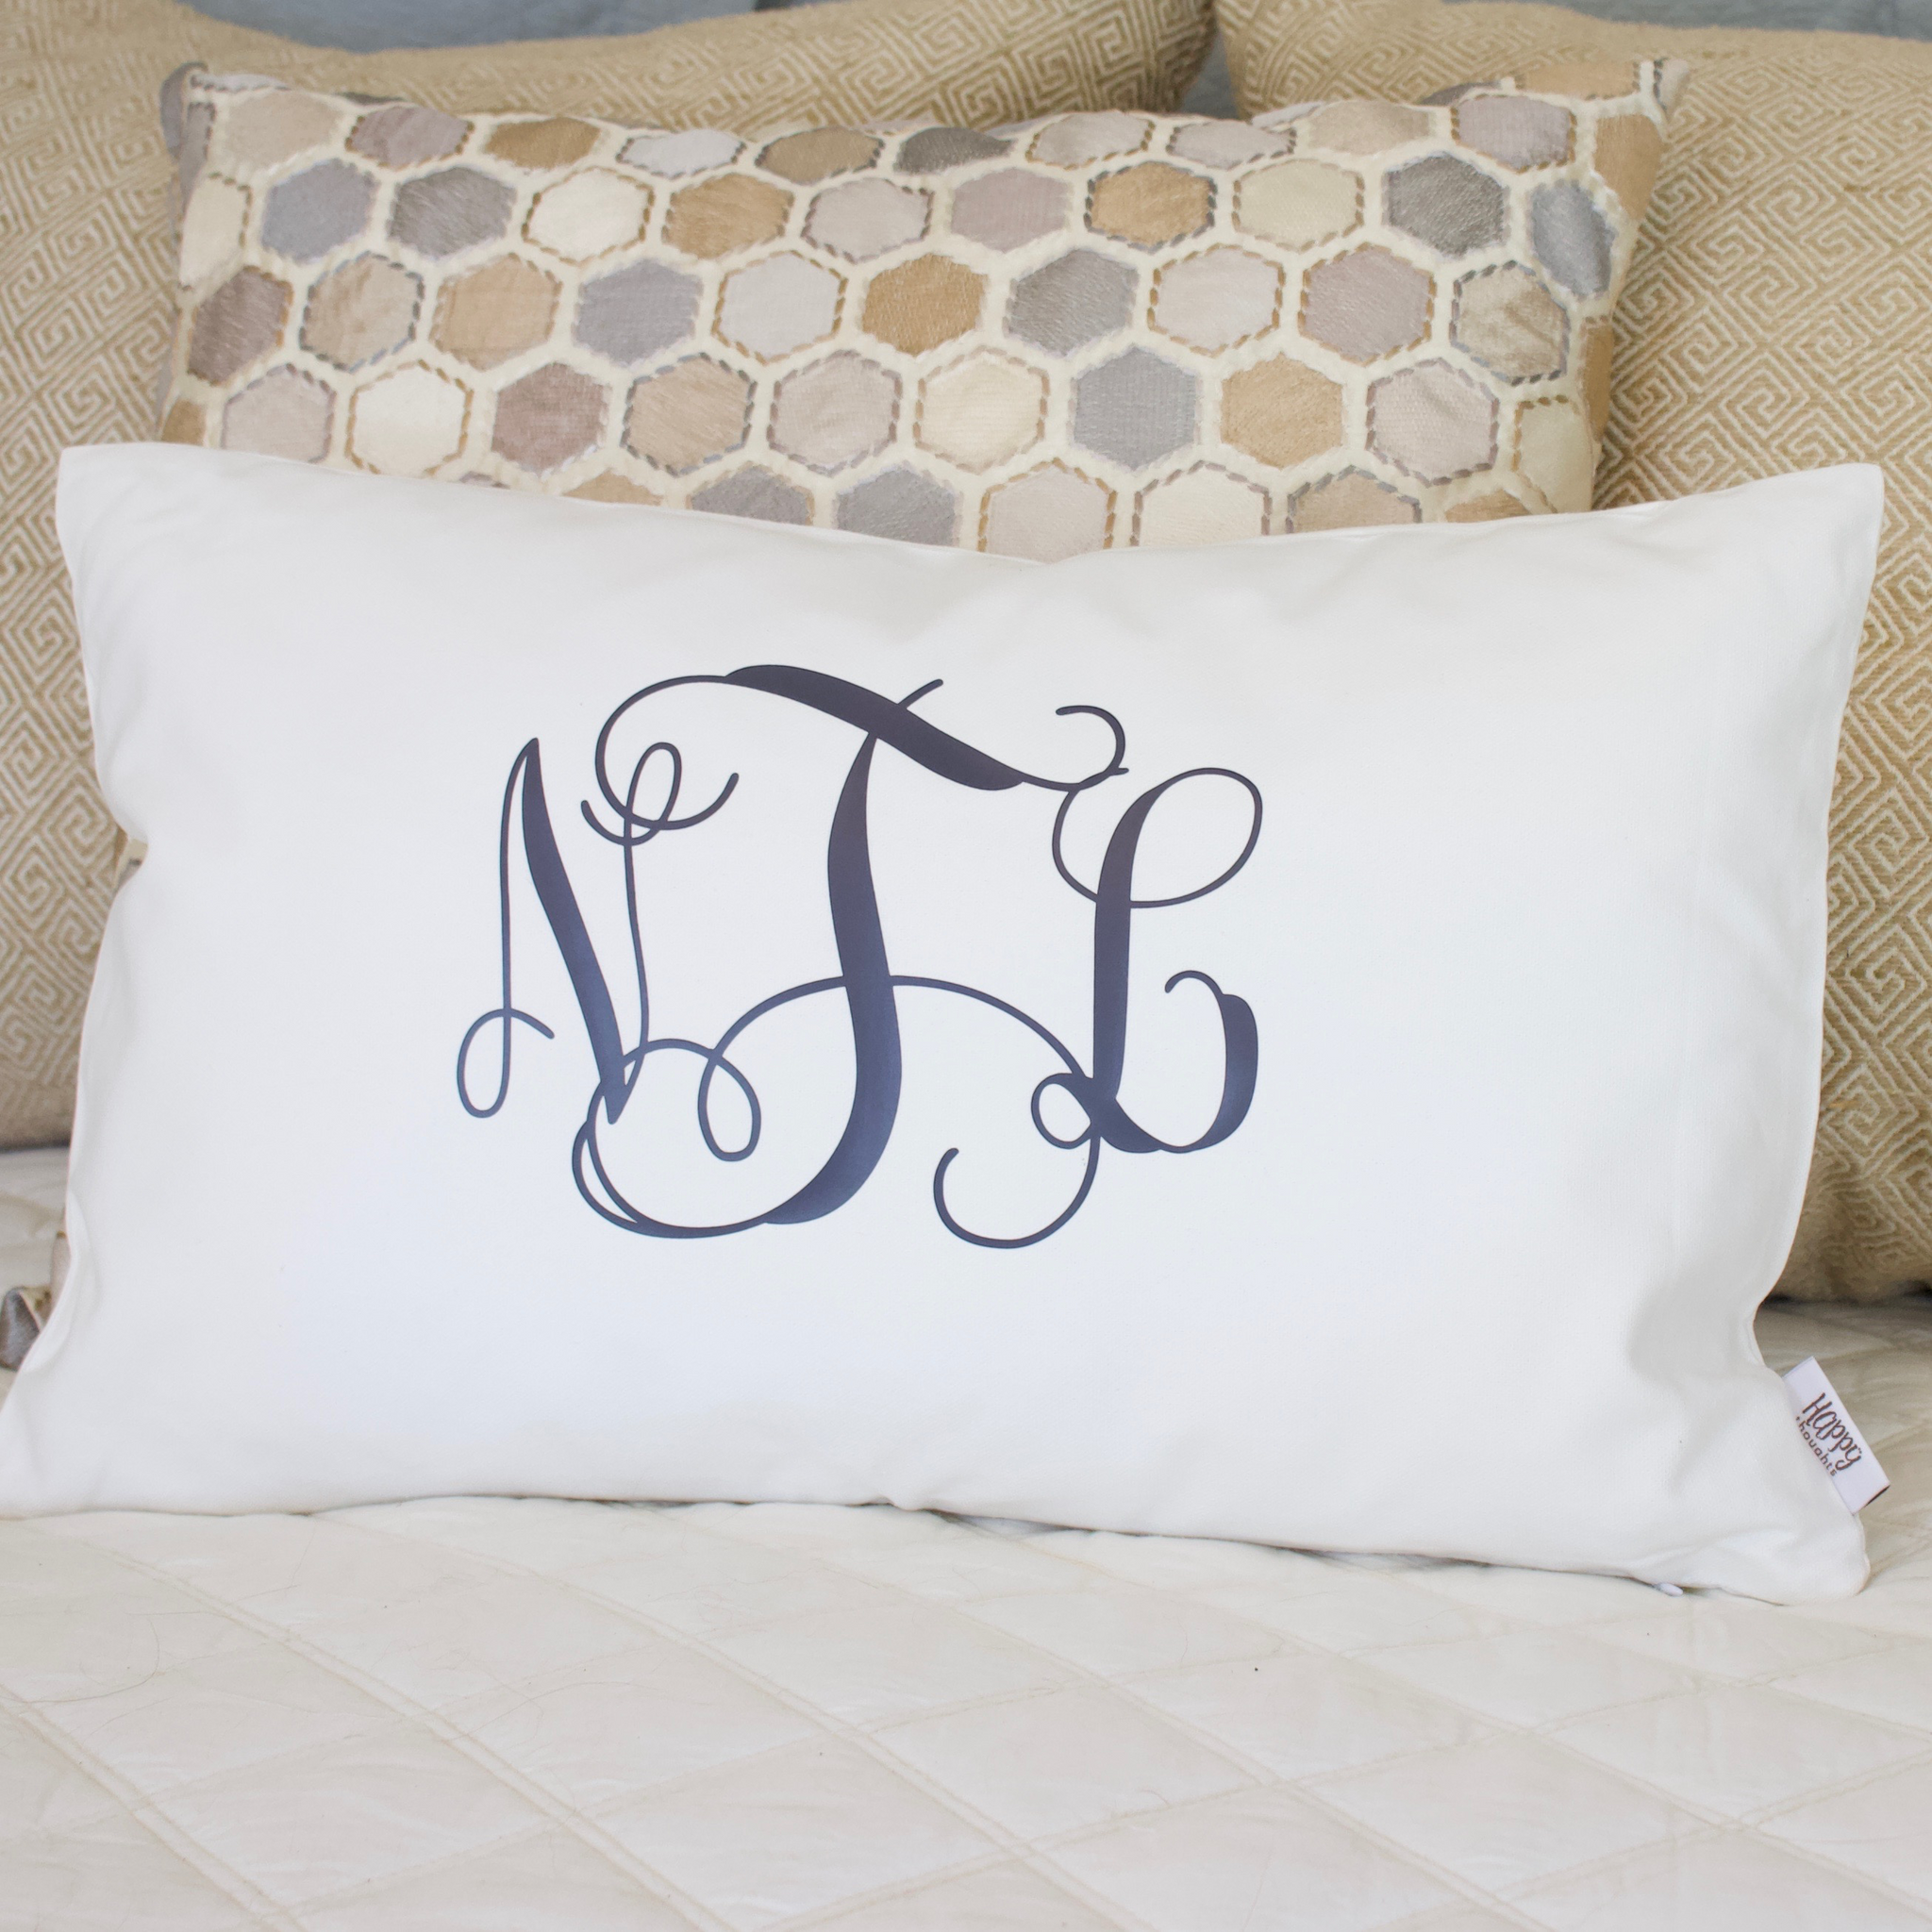 Personalized Calligraphy Monogram Throw Pillow - Favors & Flowers